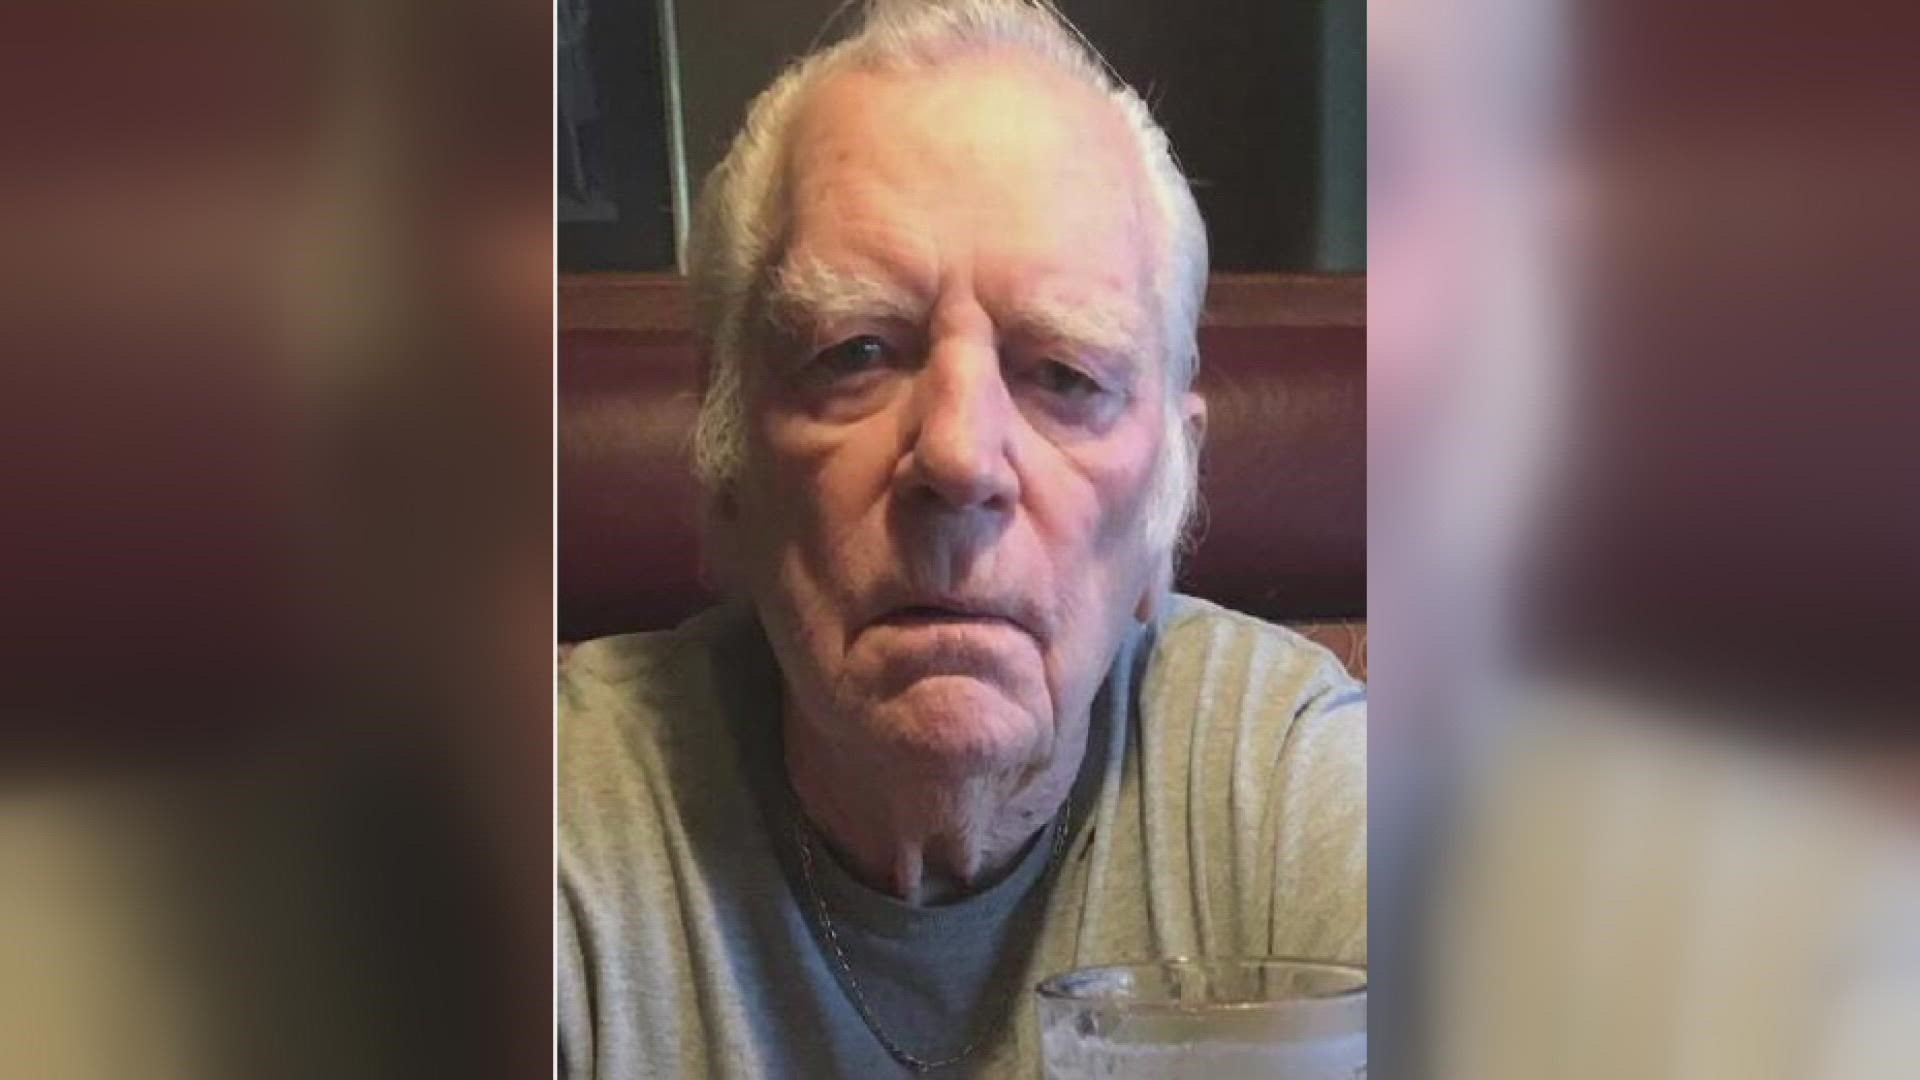 Mitchell Lee Riley, 81, was traveling to Missouri with his wife in a separate vehicle when he went missing just after midnight on Wednesday.